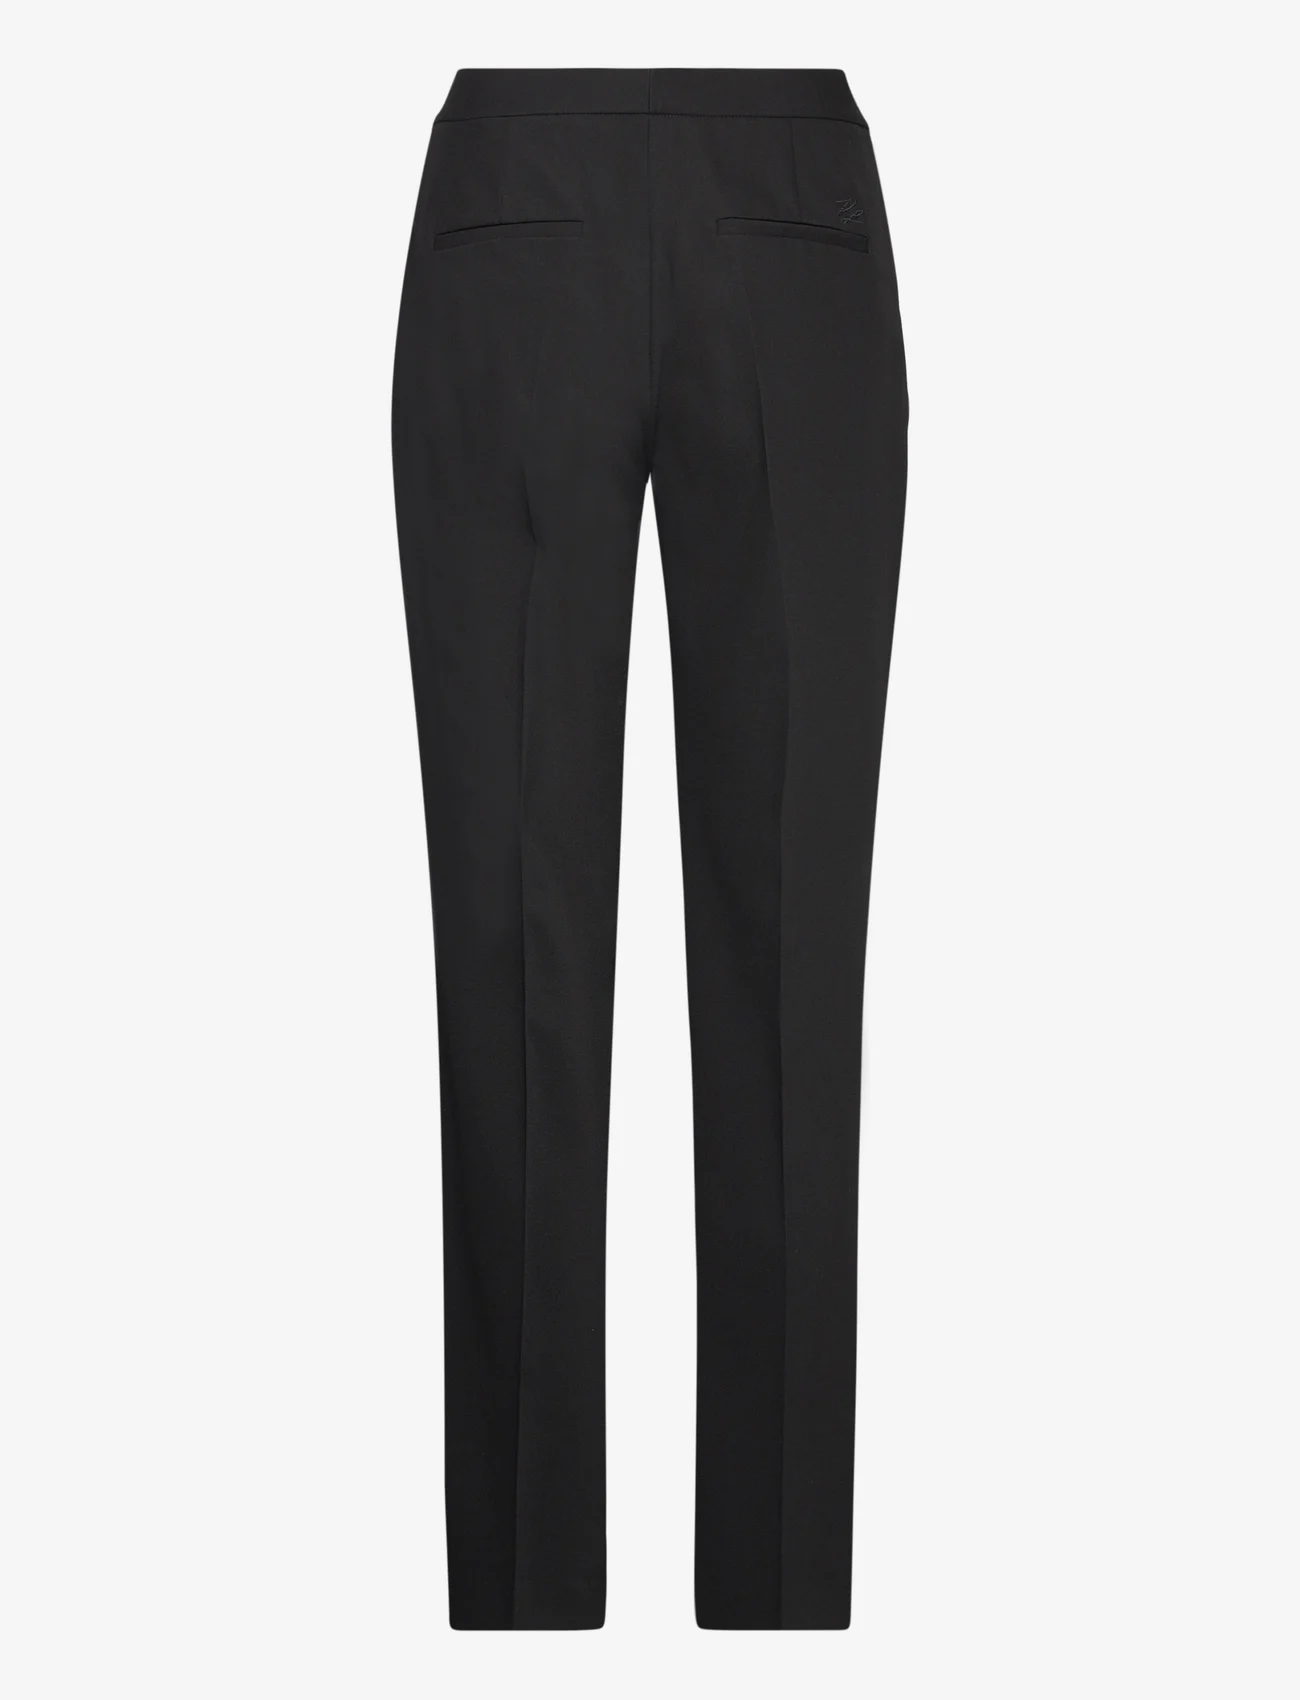 Karl Lagerfeld - tailored pants - tailored trousers - black - 1